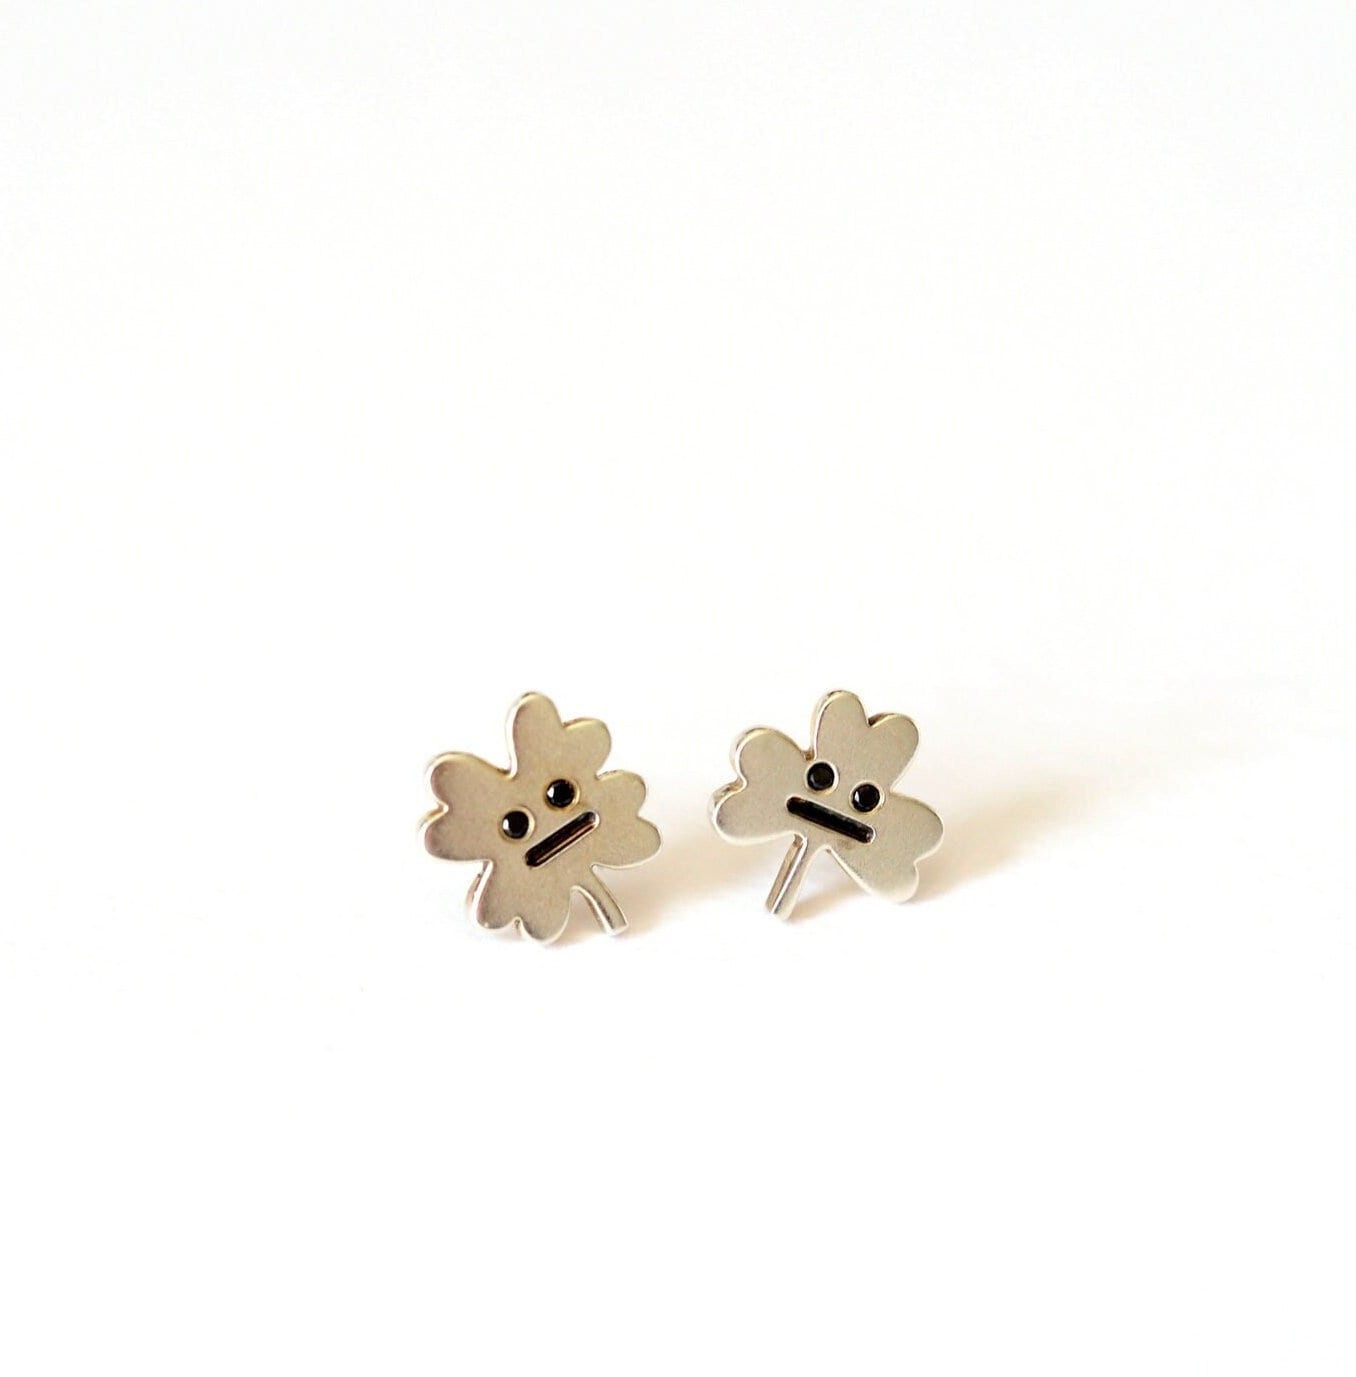 Clover Leaf Earrings - Recycled Sterling Silver and Black Diamonds